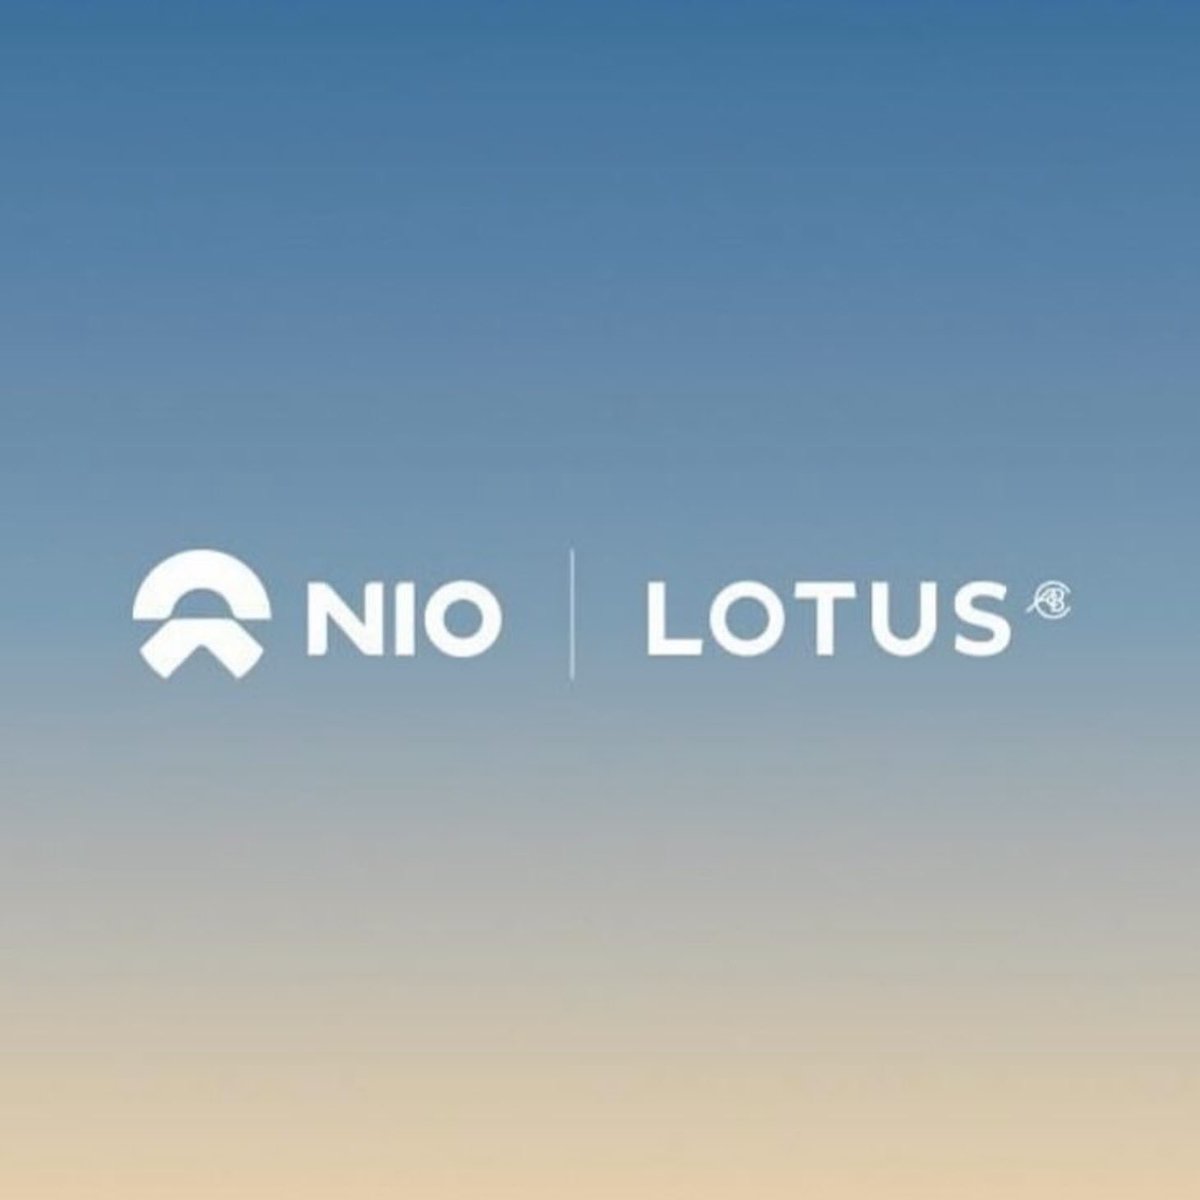 Nothing to see Wall Street?

One step closer to Volvo 
One step closer to NIO swapping entering the United States of blocking Chinese EV.

Btw - Volvo has “made in China stamped all over it”.
@GeelyGroup 
@VolvoGroup 
@VolvoCarUSA 
@volvocars 
@lotuscars 
@NIOGlobal 
#nio